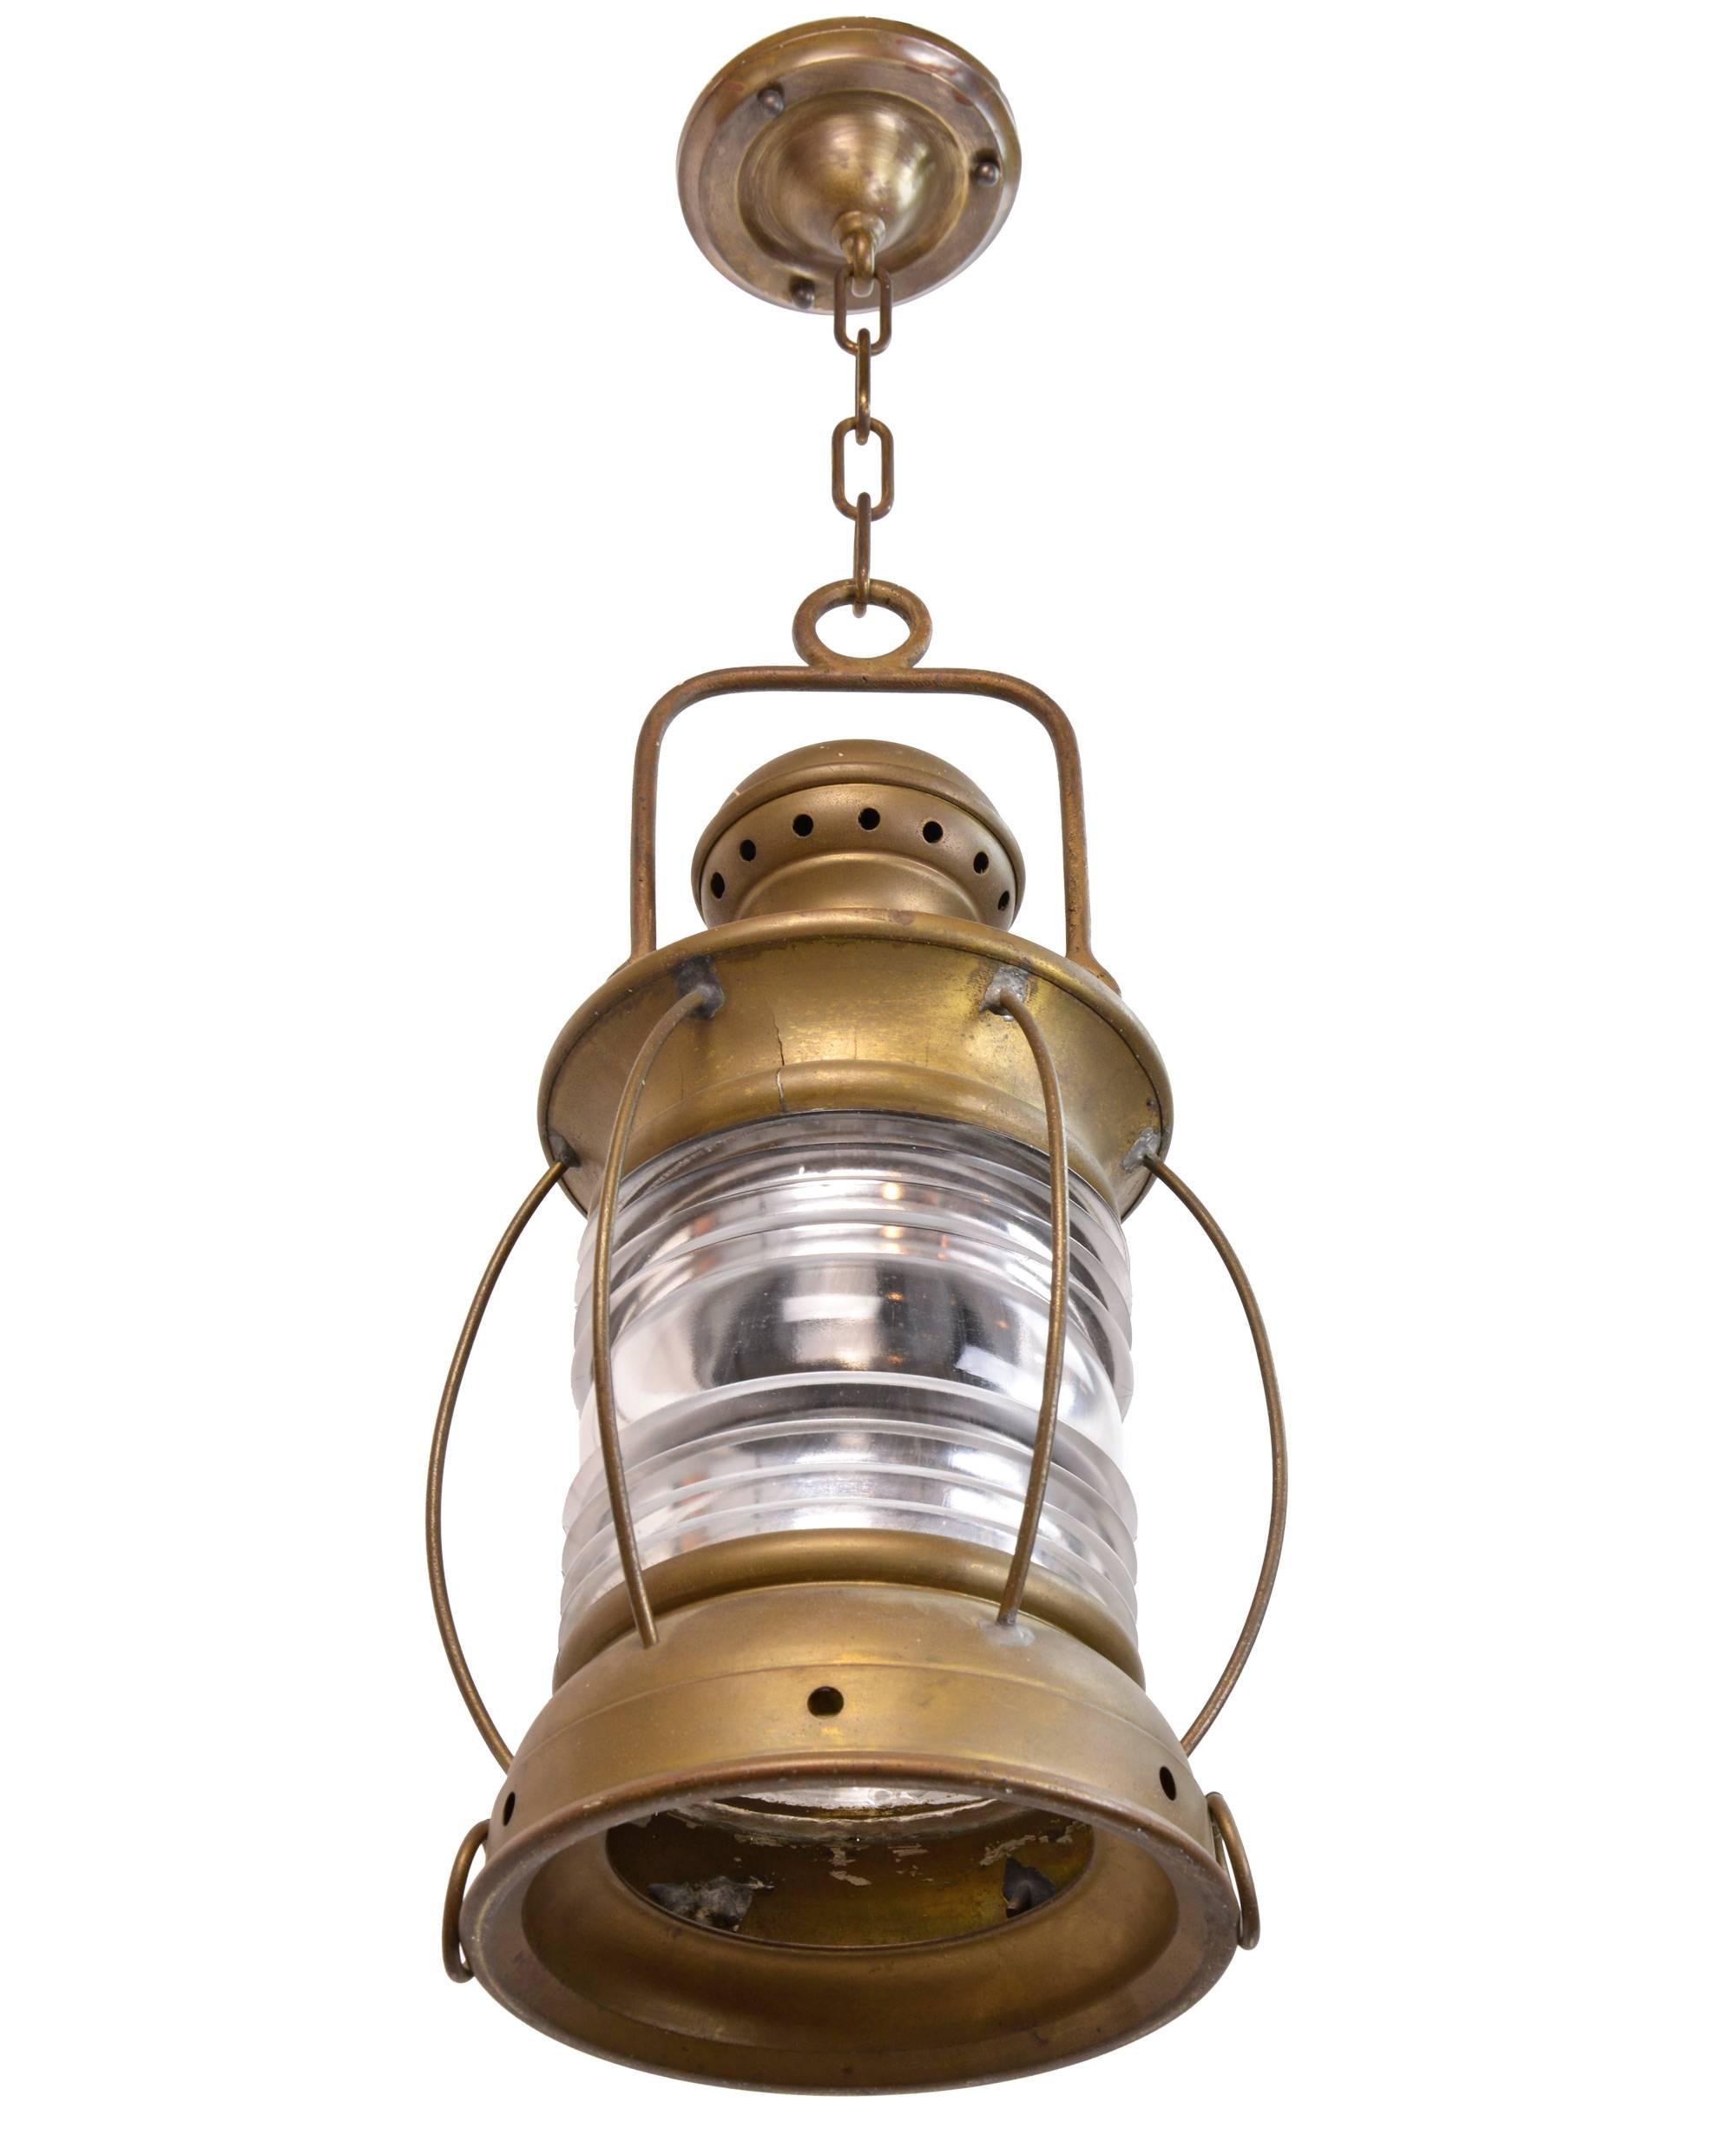 The Perkins Marine Lamp Corp. of Brooklyn, NY have been known for quality nautical lighting for decades and are now know as Perko. Here, are a pair of early pendants. Perfect patina in brass, each has its original ribbed glass and are a great size